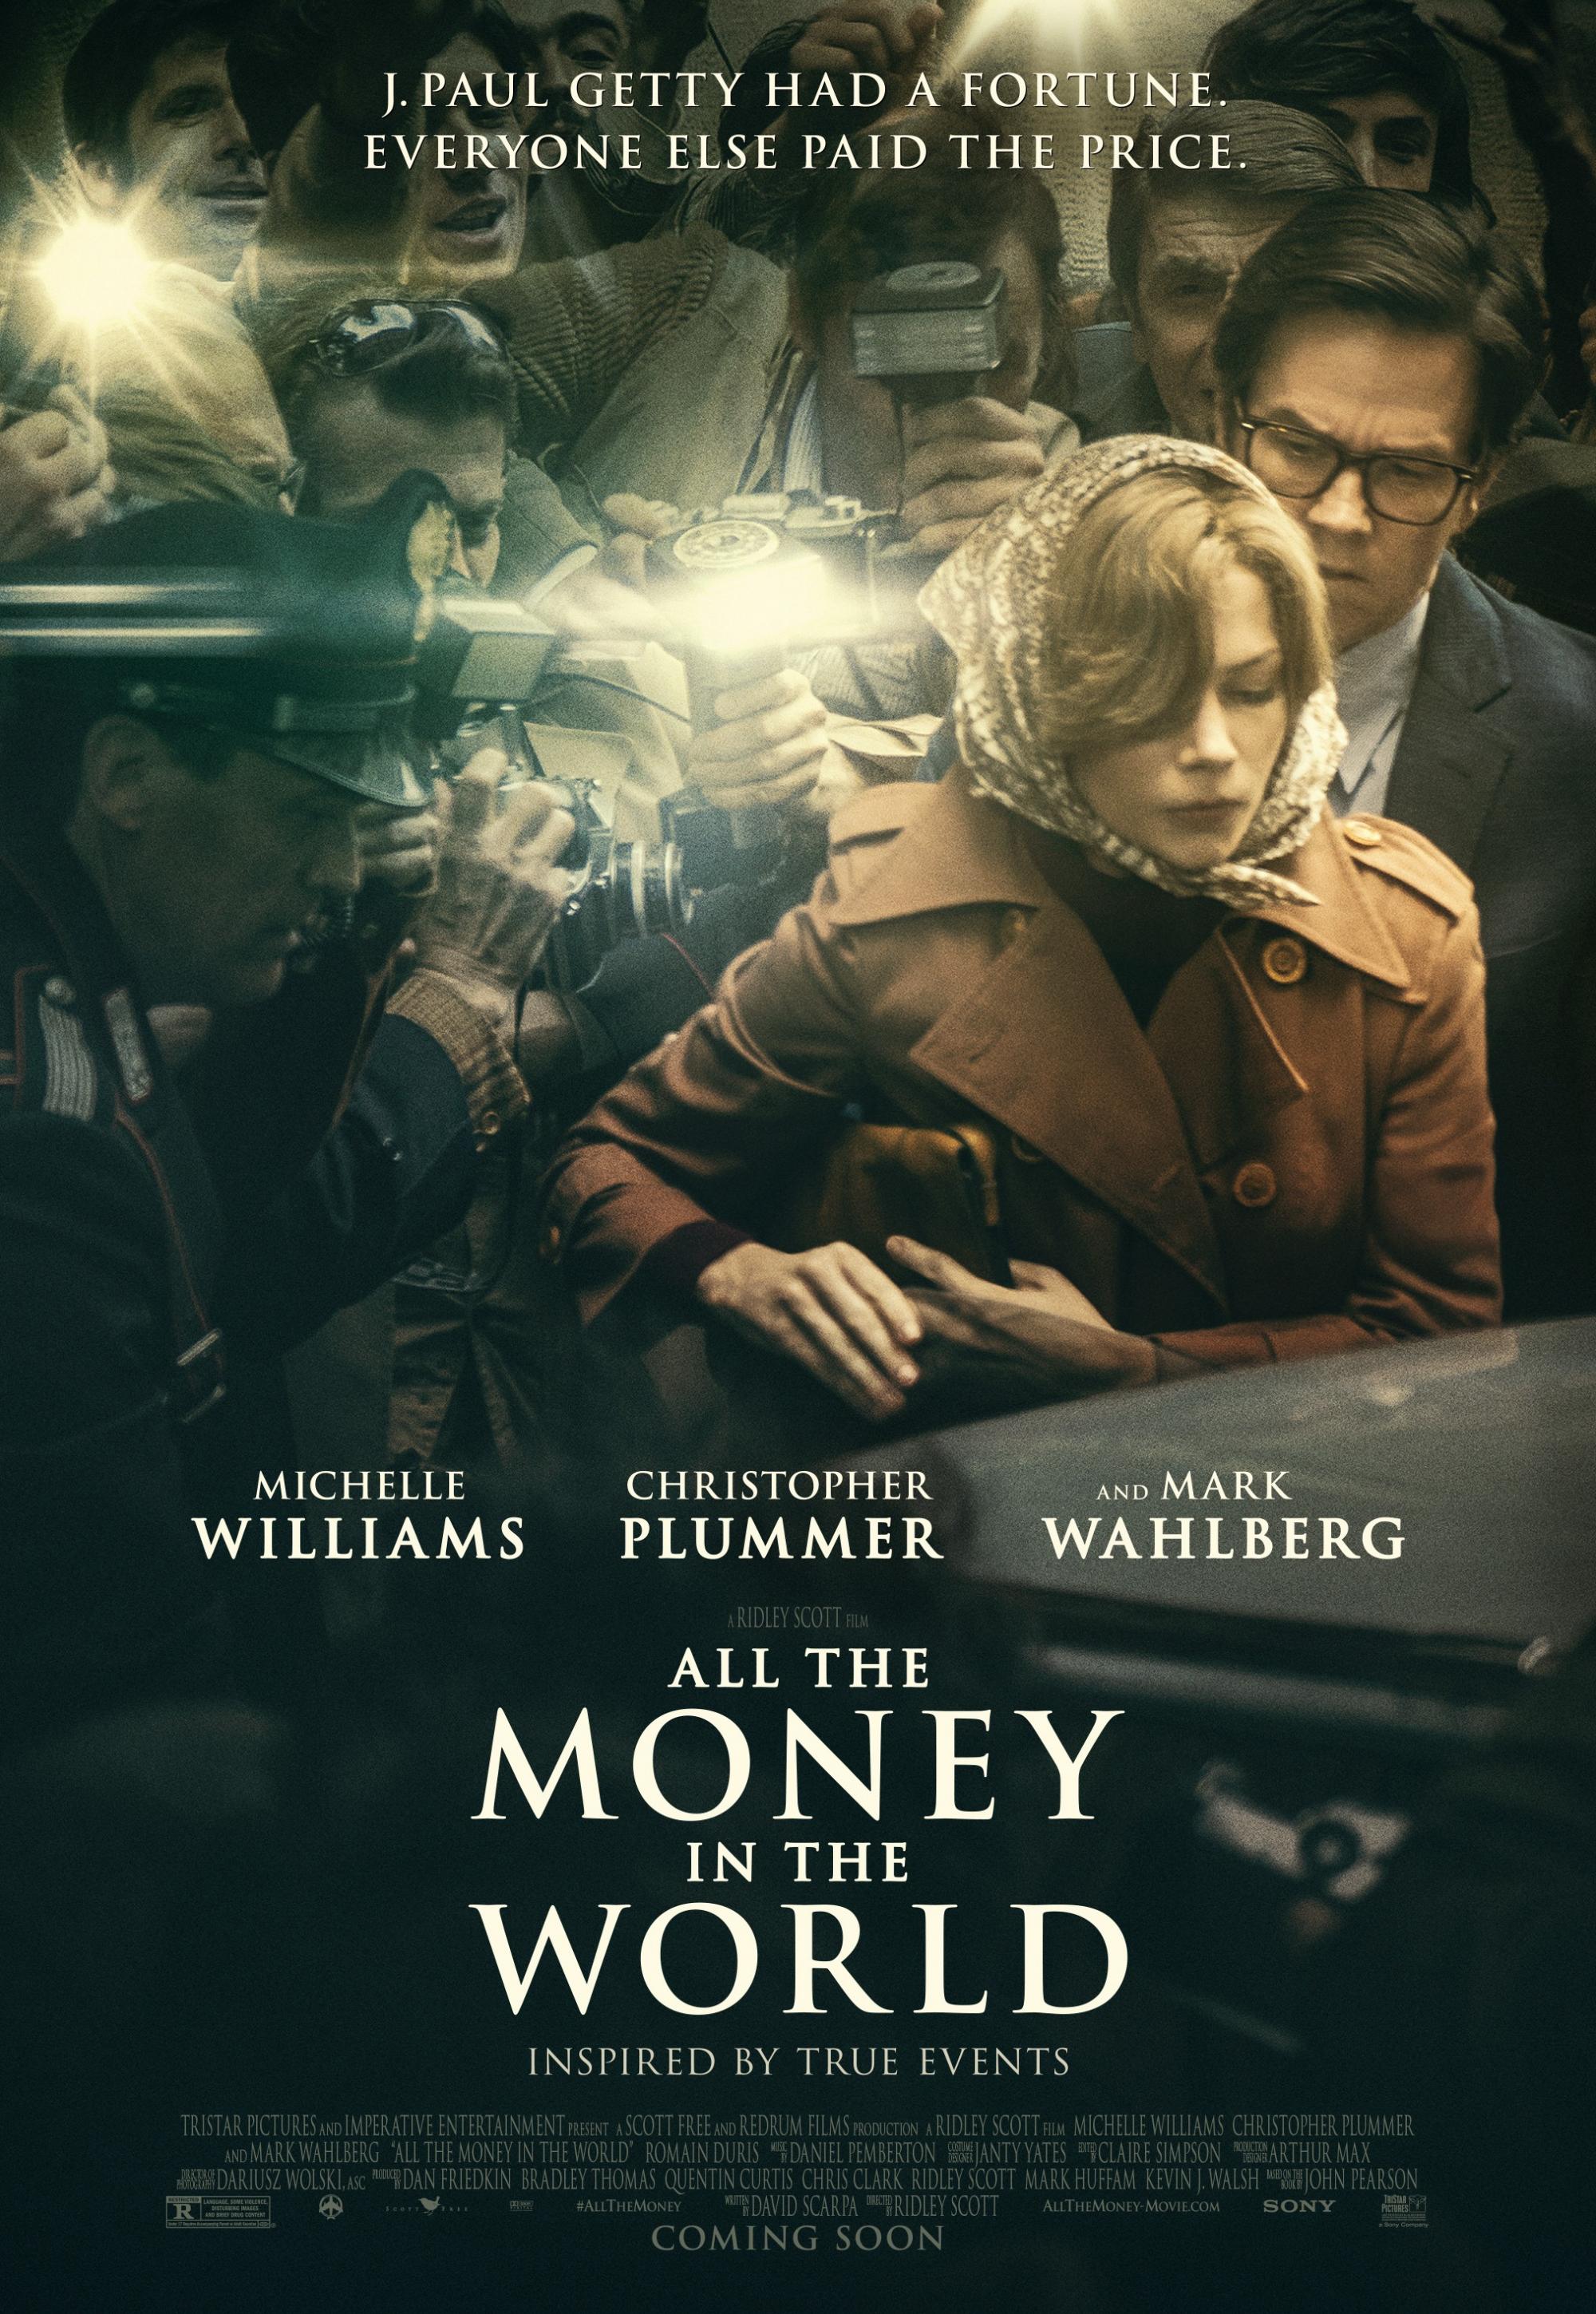 All the Money in the World (2017) ★★☆☆☆